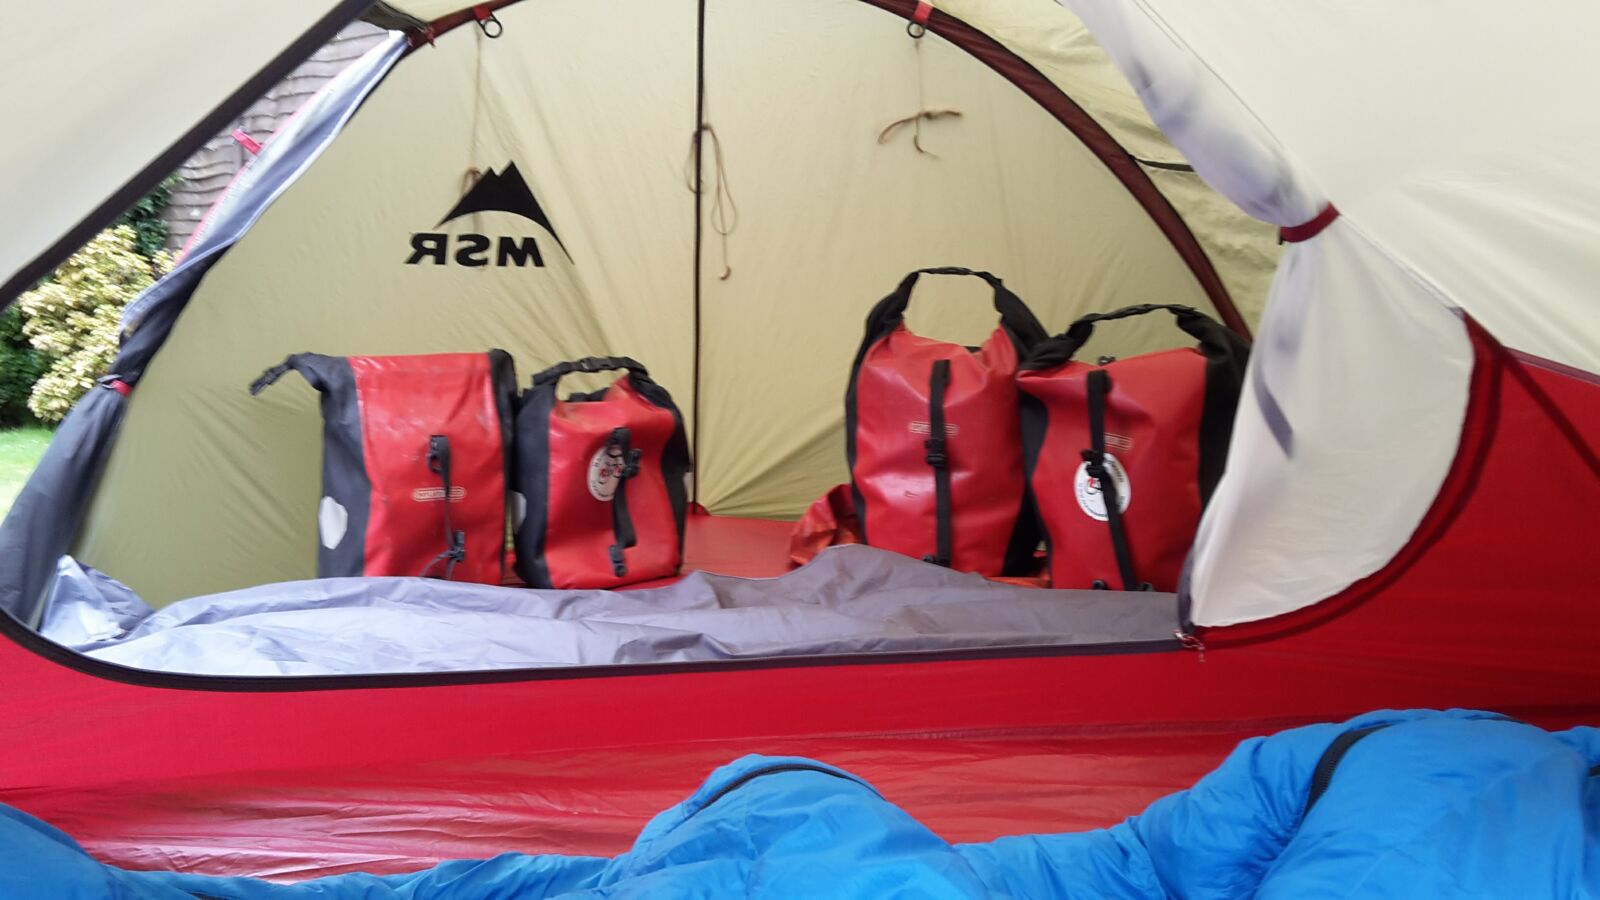 A group of red bags in a tent